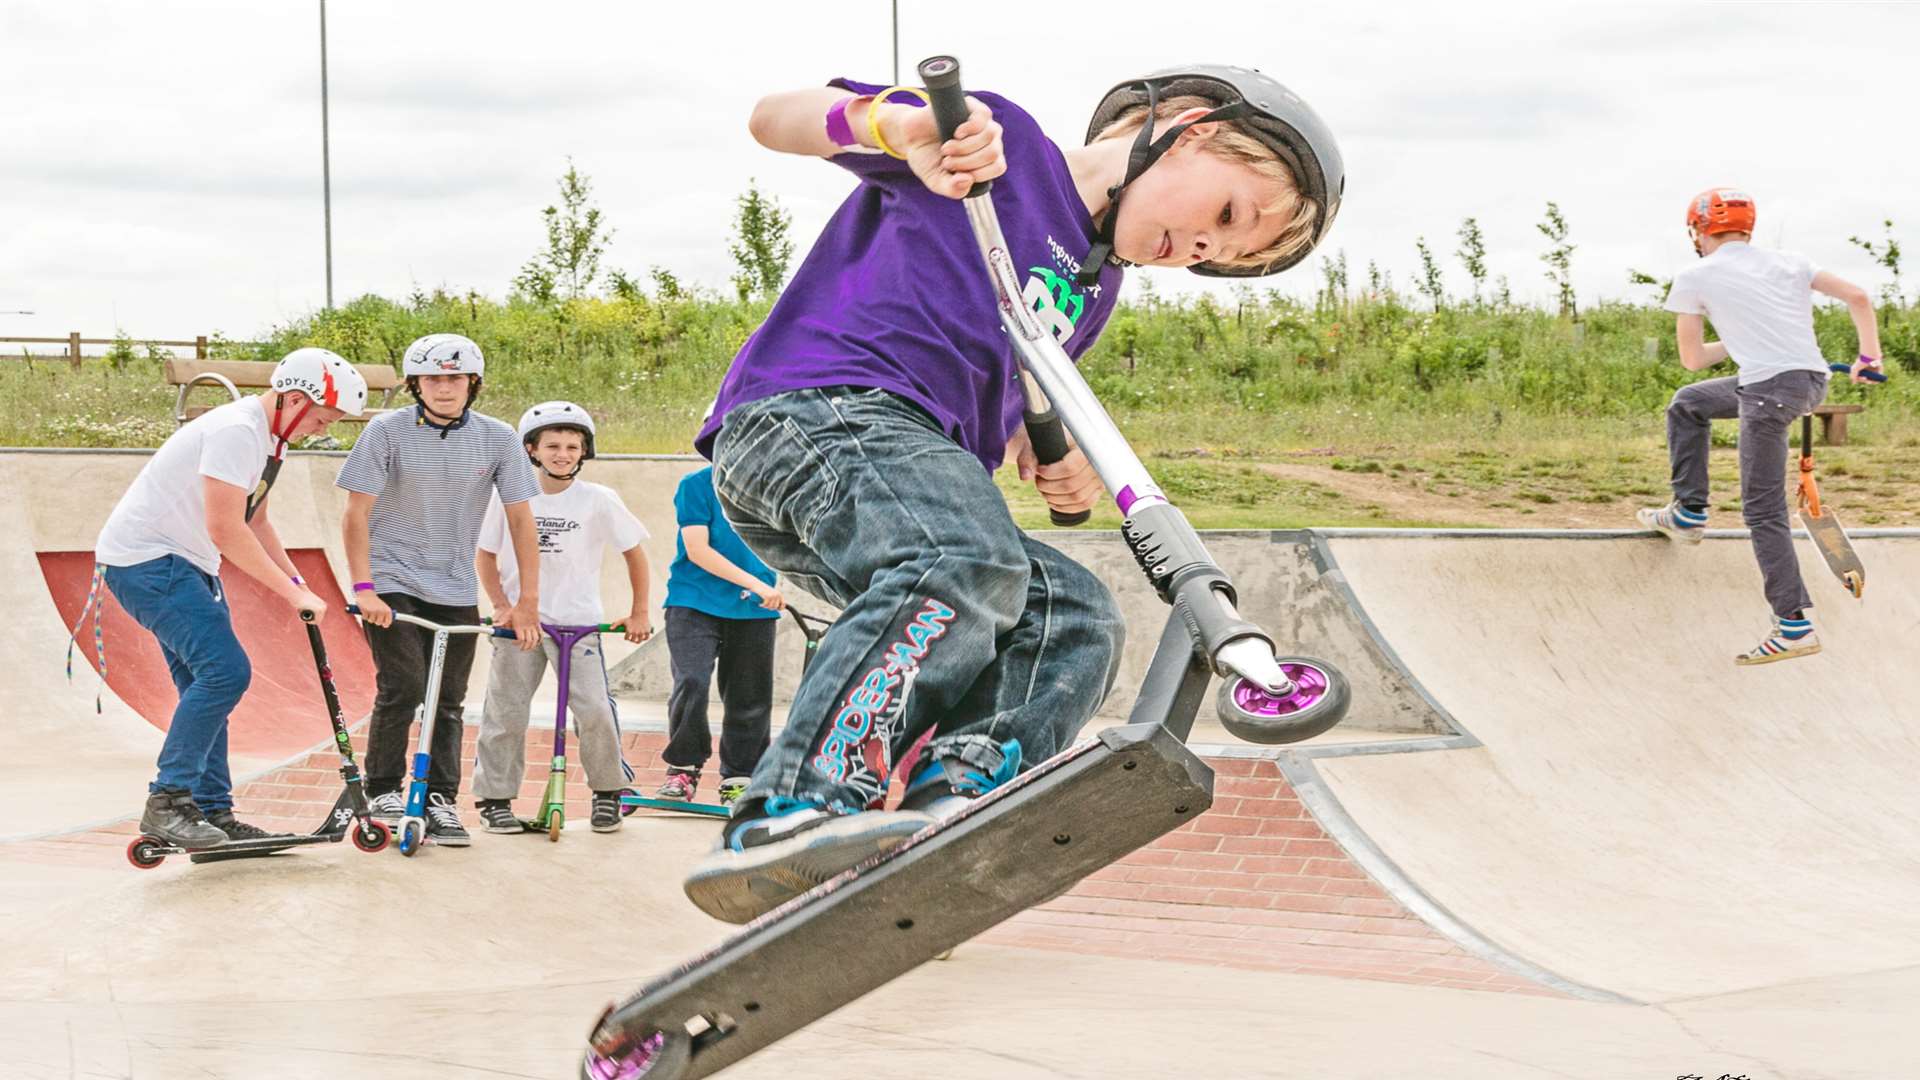 Cyclopark's Family Fun Day is on Monday, May 30